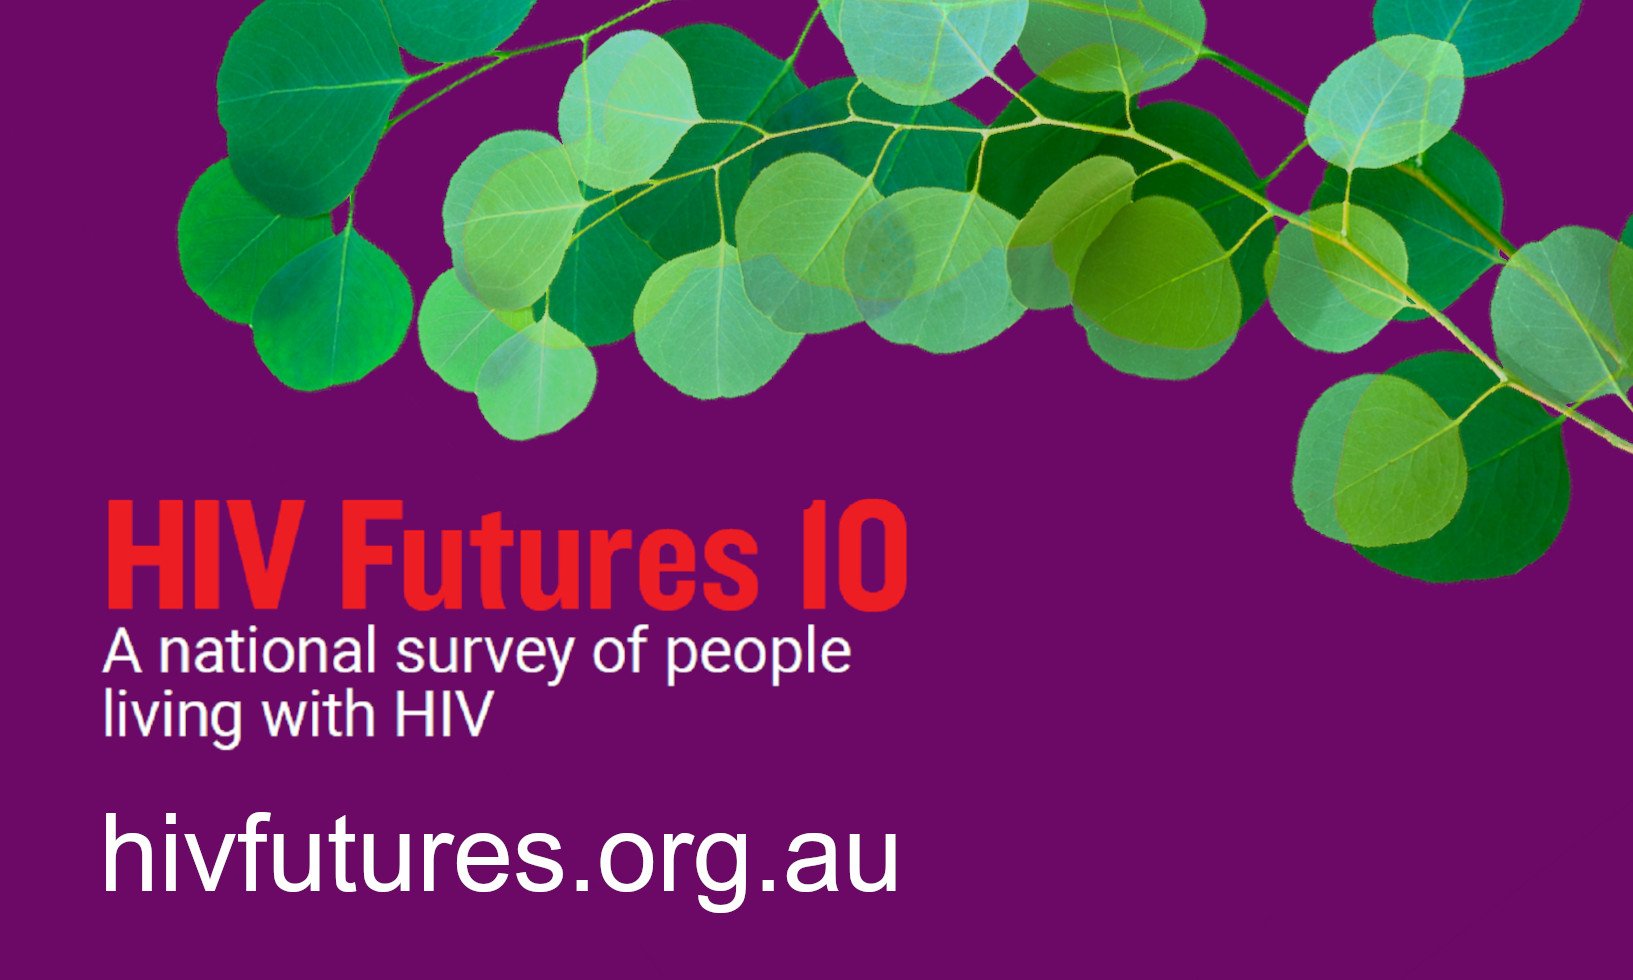 Design of green gum leaves on plum background with text 'HIV Futures 10 A national survey of people living with HIV hivfutures.org.au